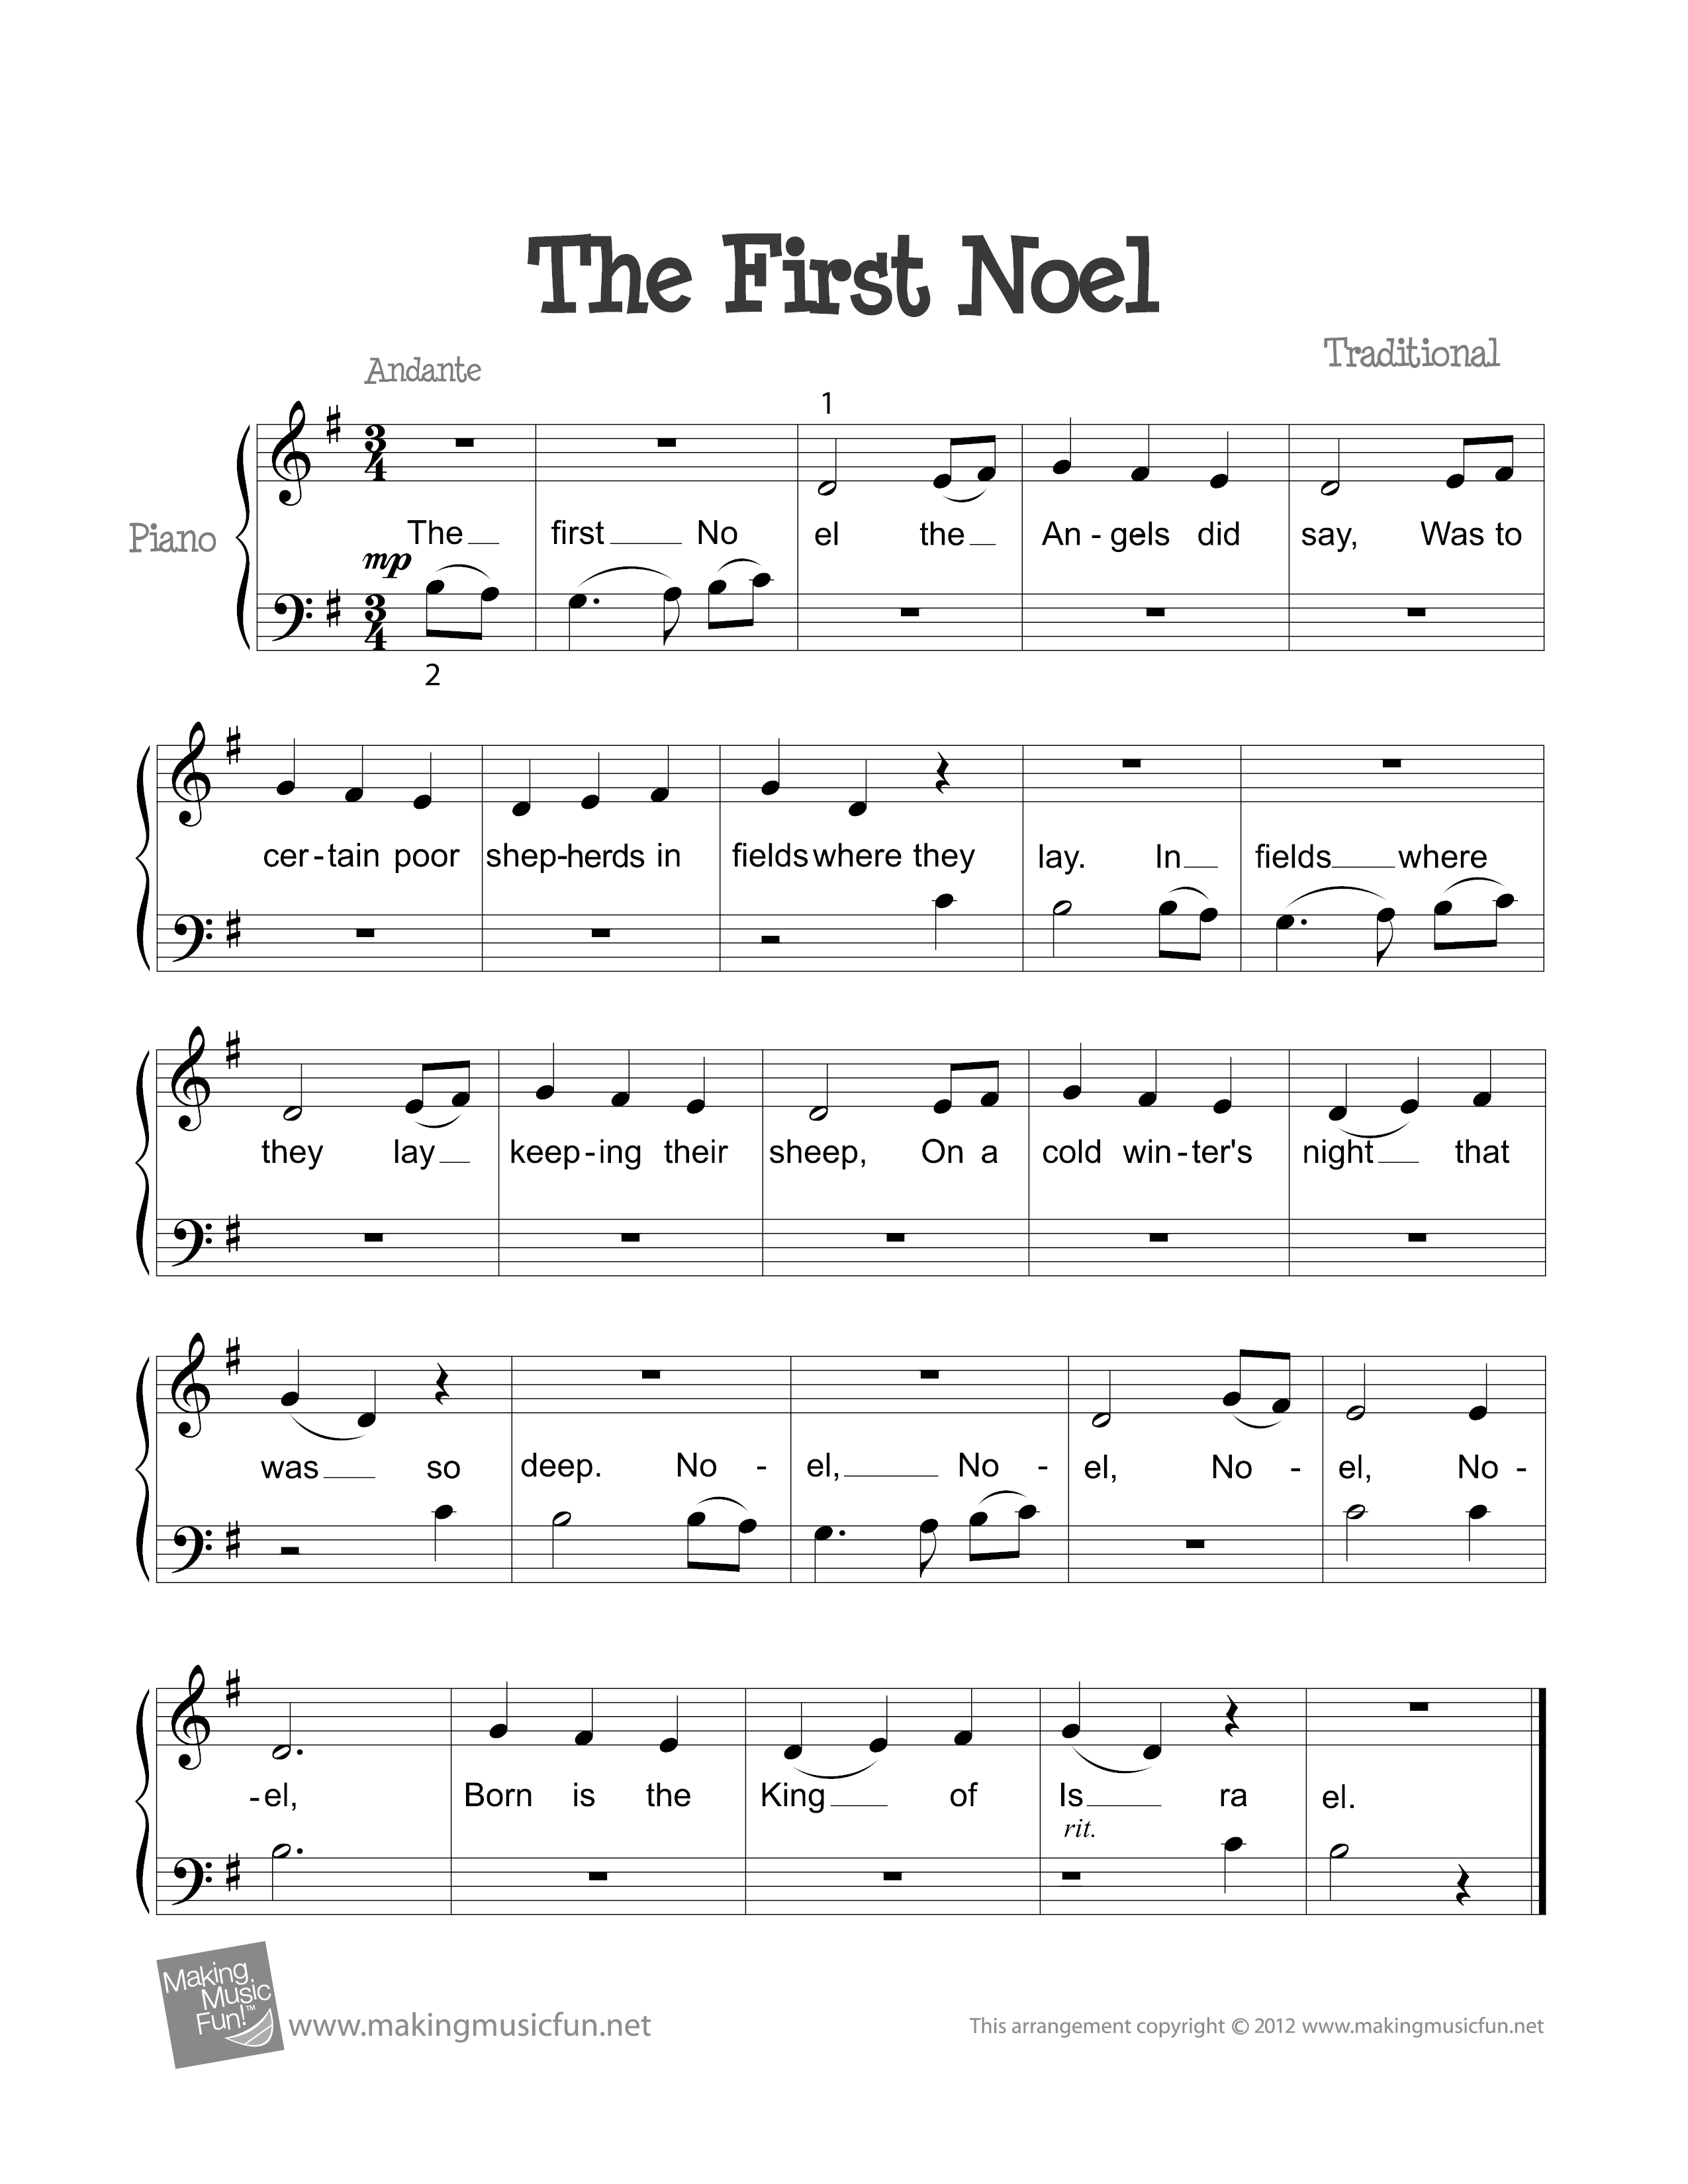 The First Noelピアノ譜